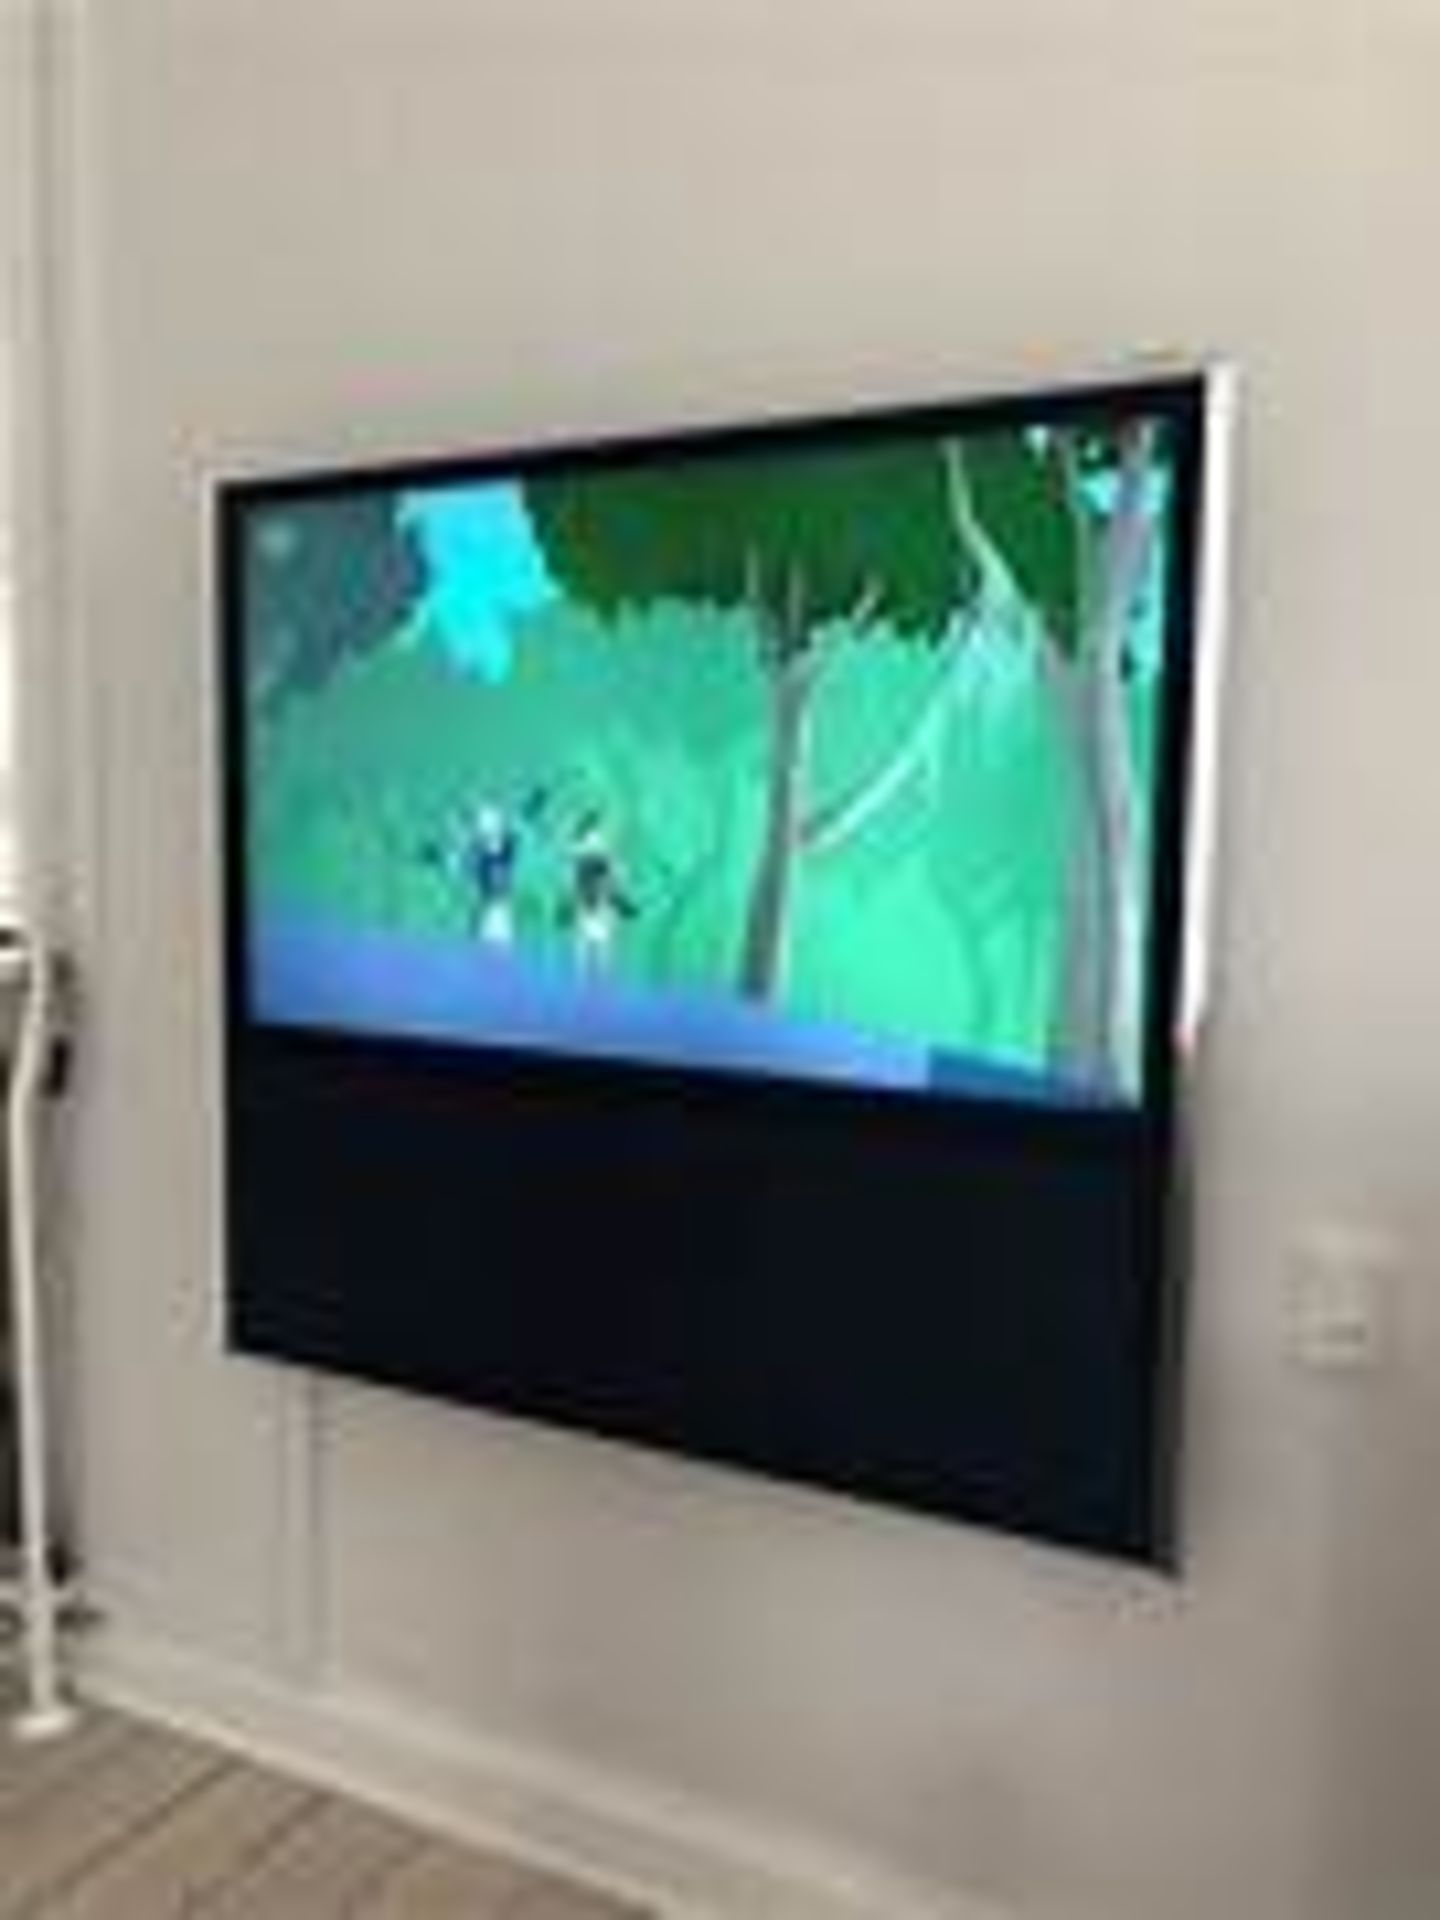 Bang Olufsen Beovision 11 40" Hotel LCD TV Resolution: 1920 x 1080 (Full HD) Tucked away under the